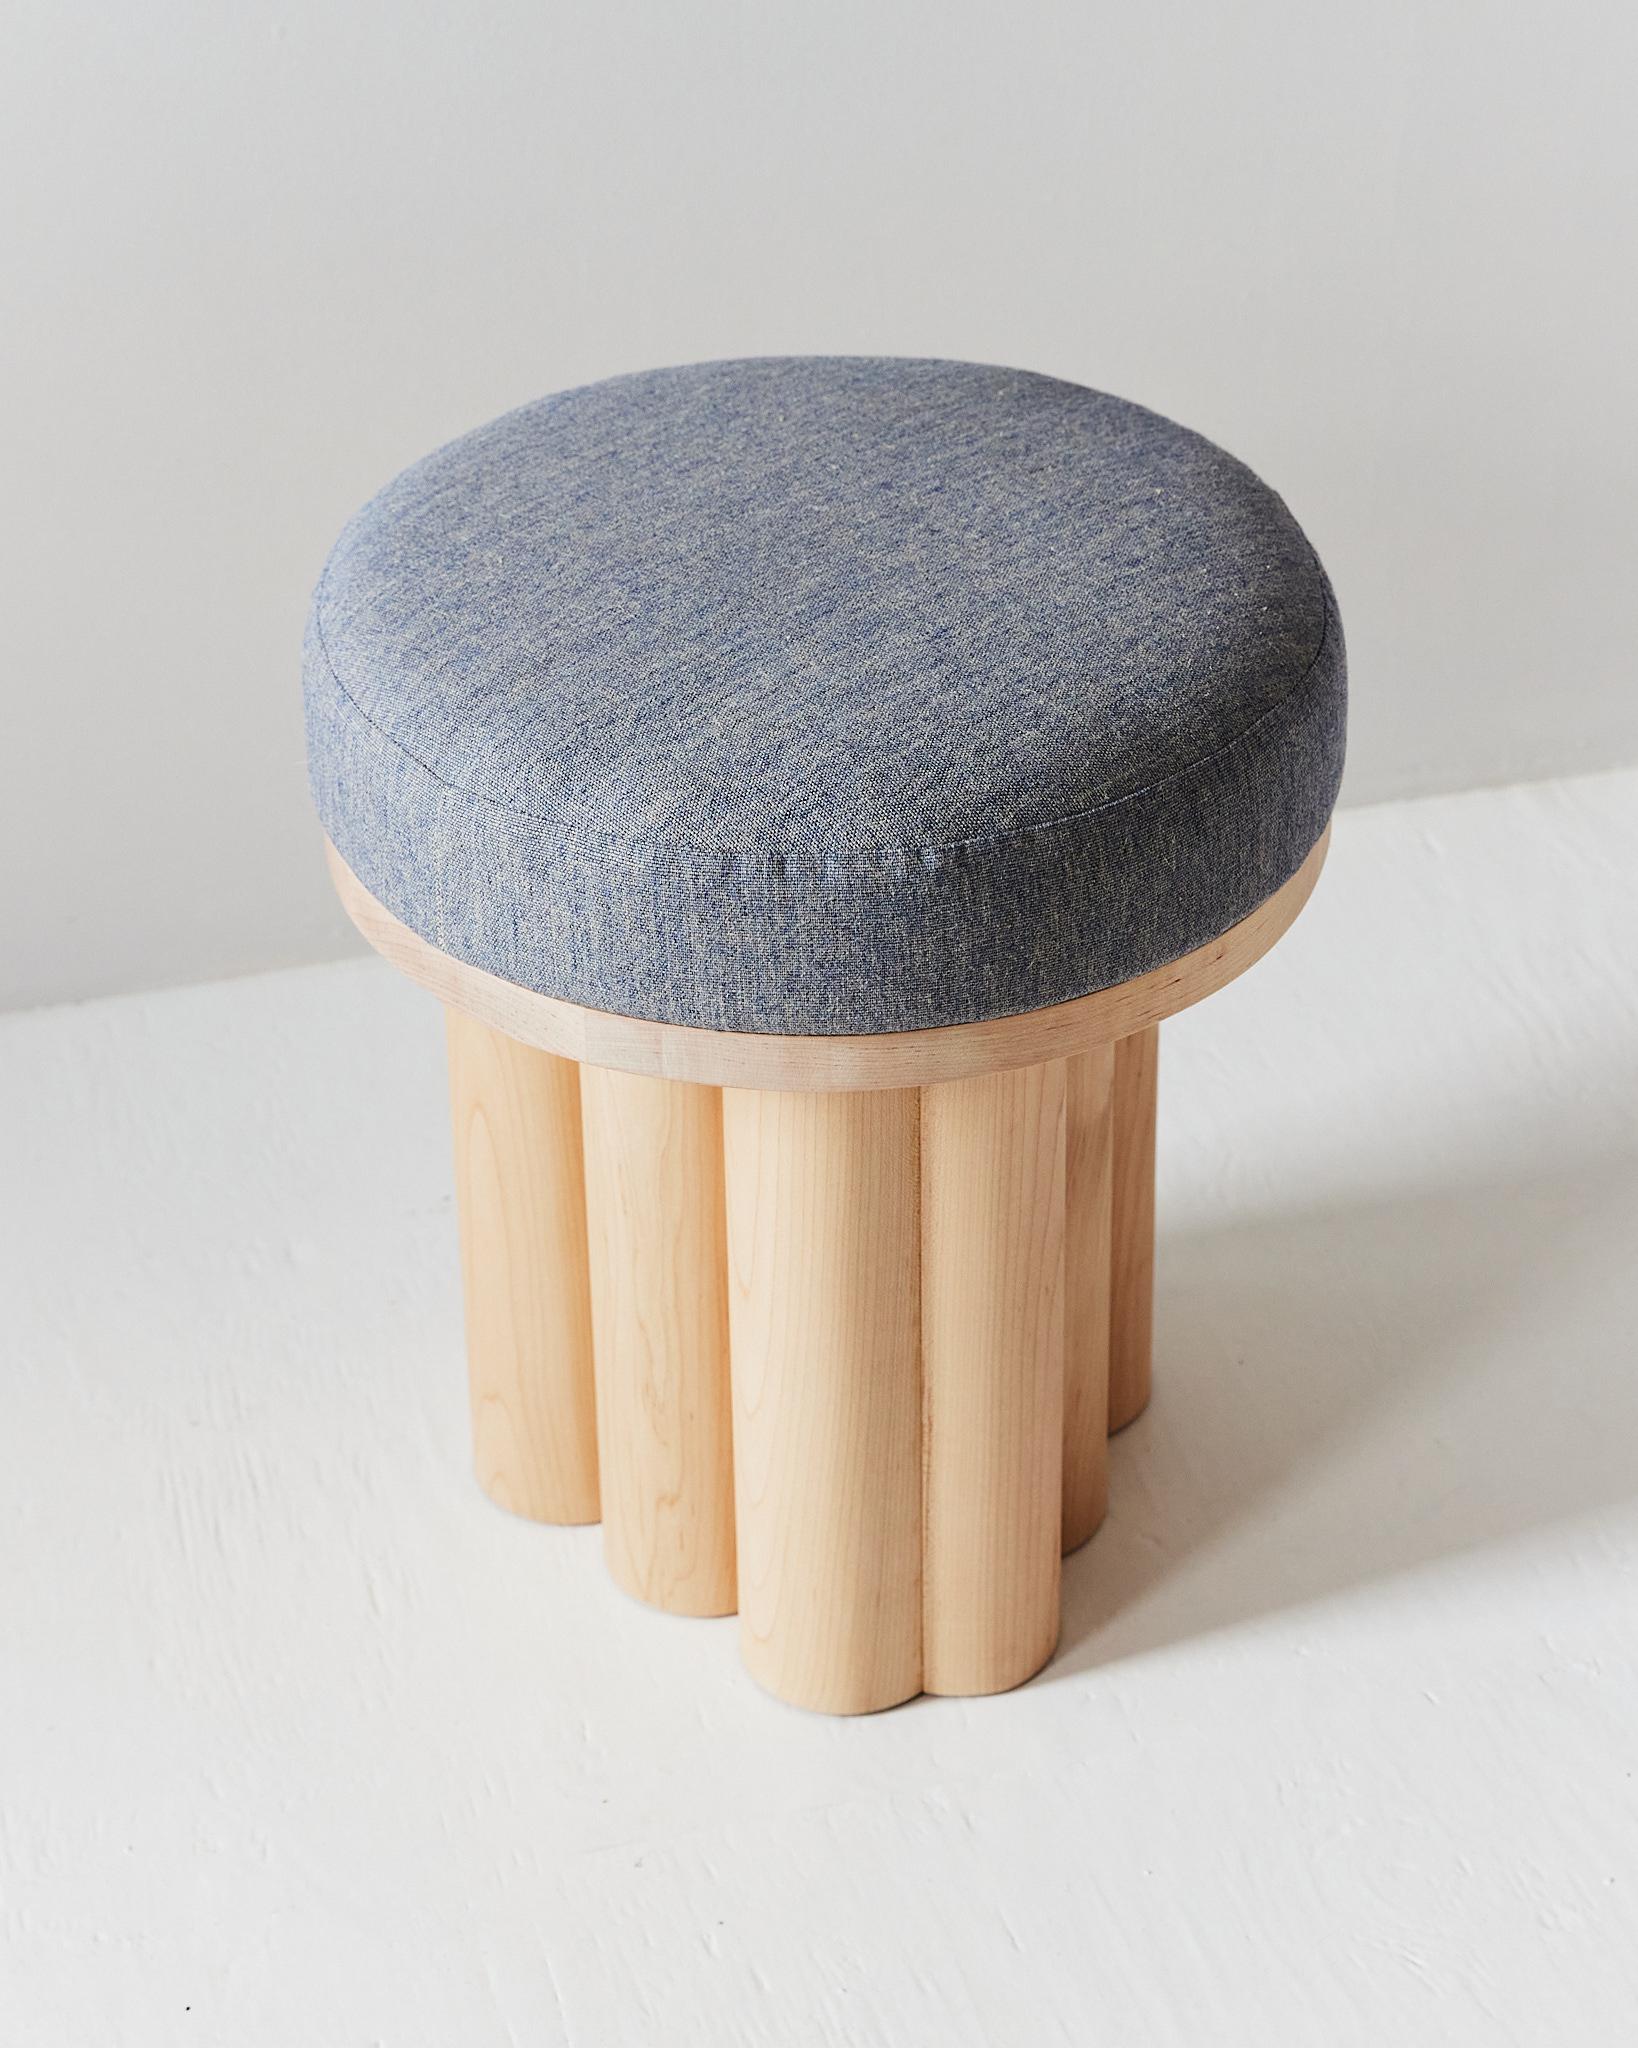 The Doric stool is a versatile and elegant piece, which has found its place in museums, offices, and homes. The brutalist, monolithic legs suggest ancient columns found around the world, offering up a simple and understated quality which is sure to